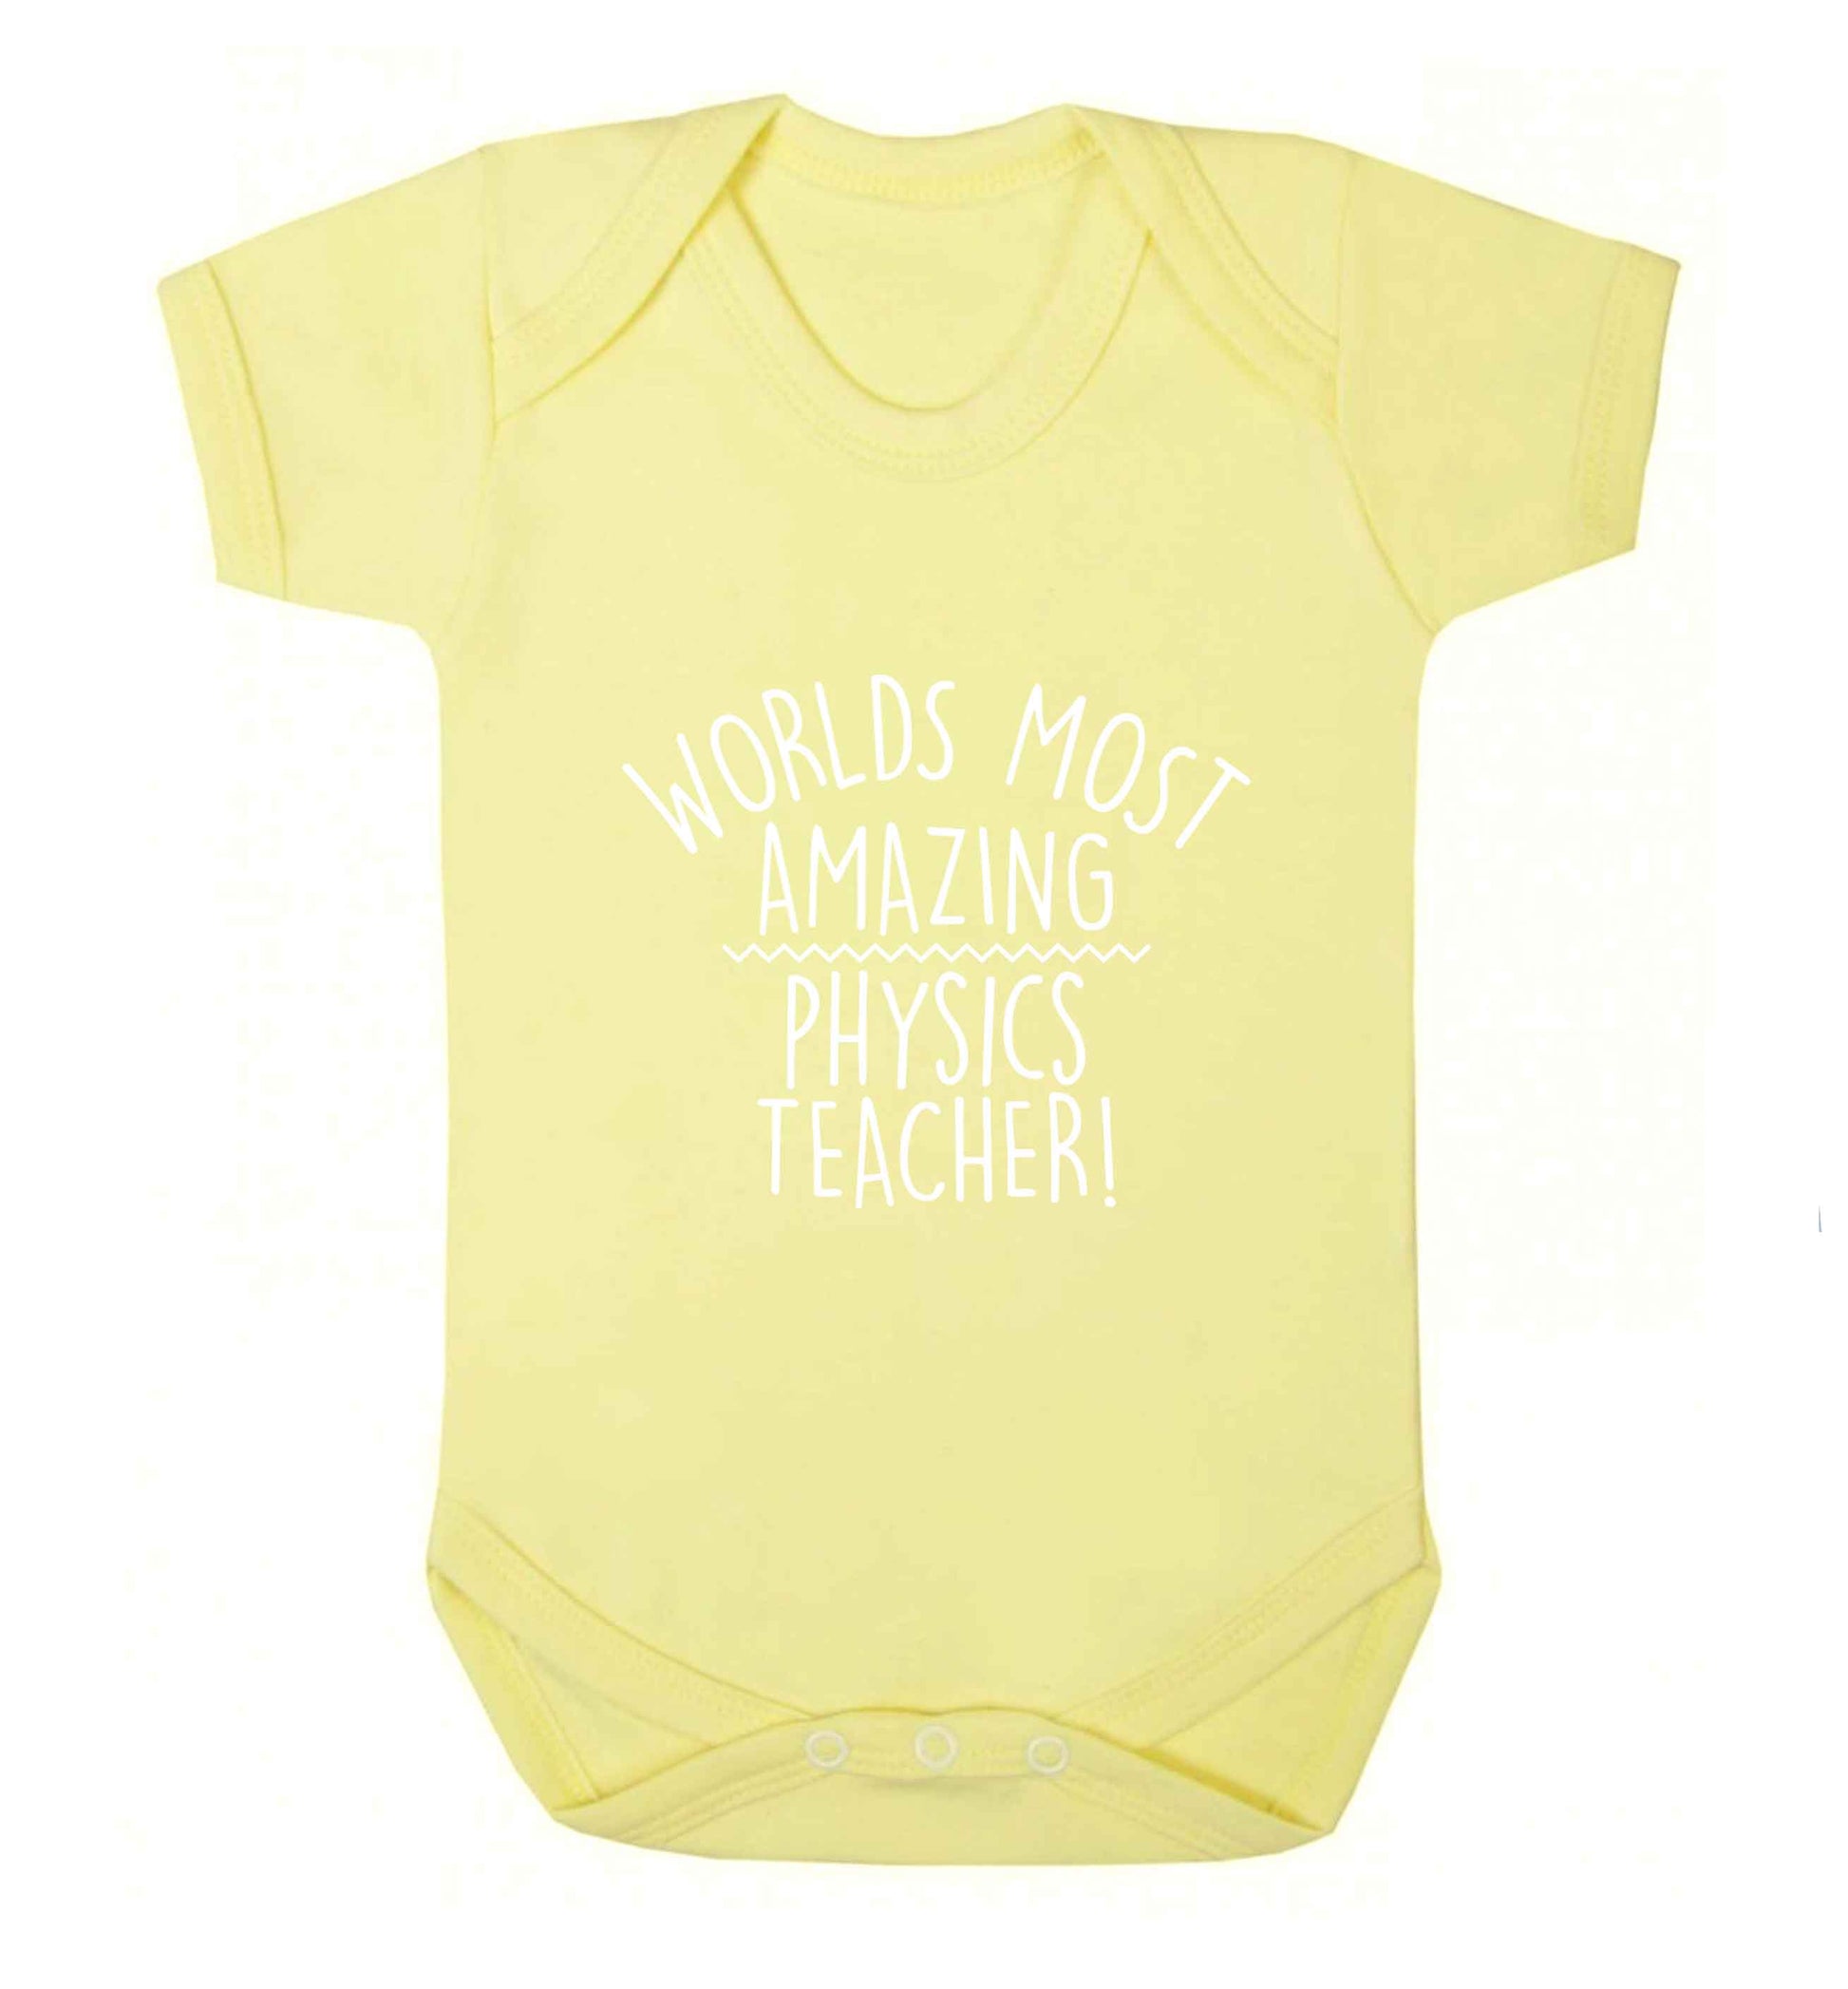 Worlds most amazing physics teacher baby vest pale yellow 18-24 months